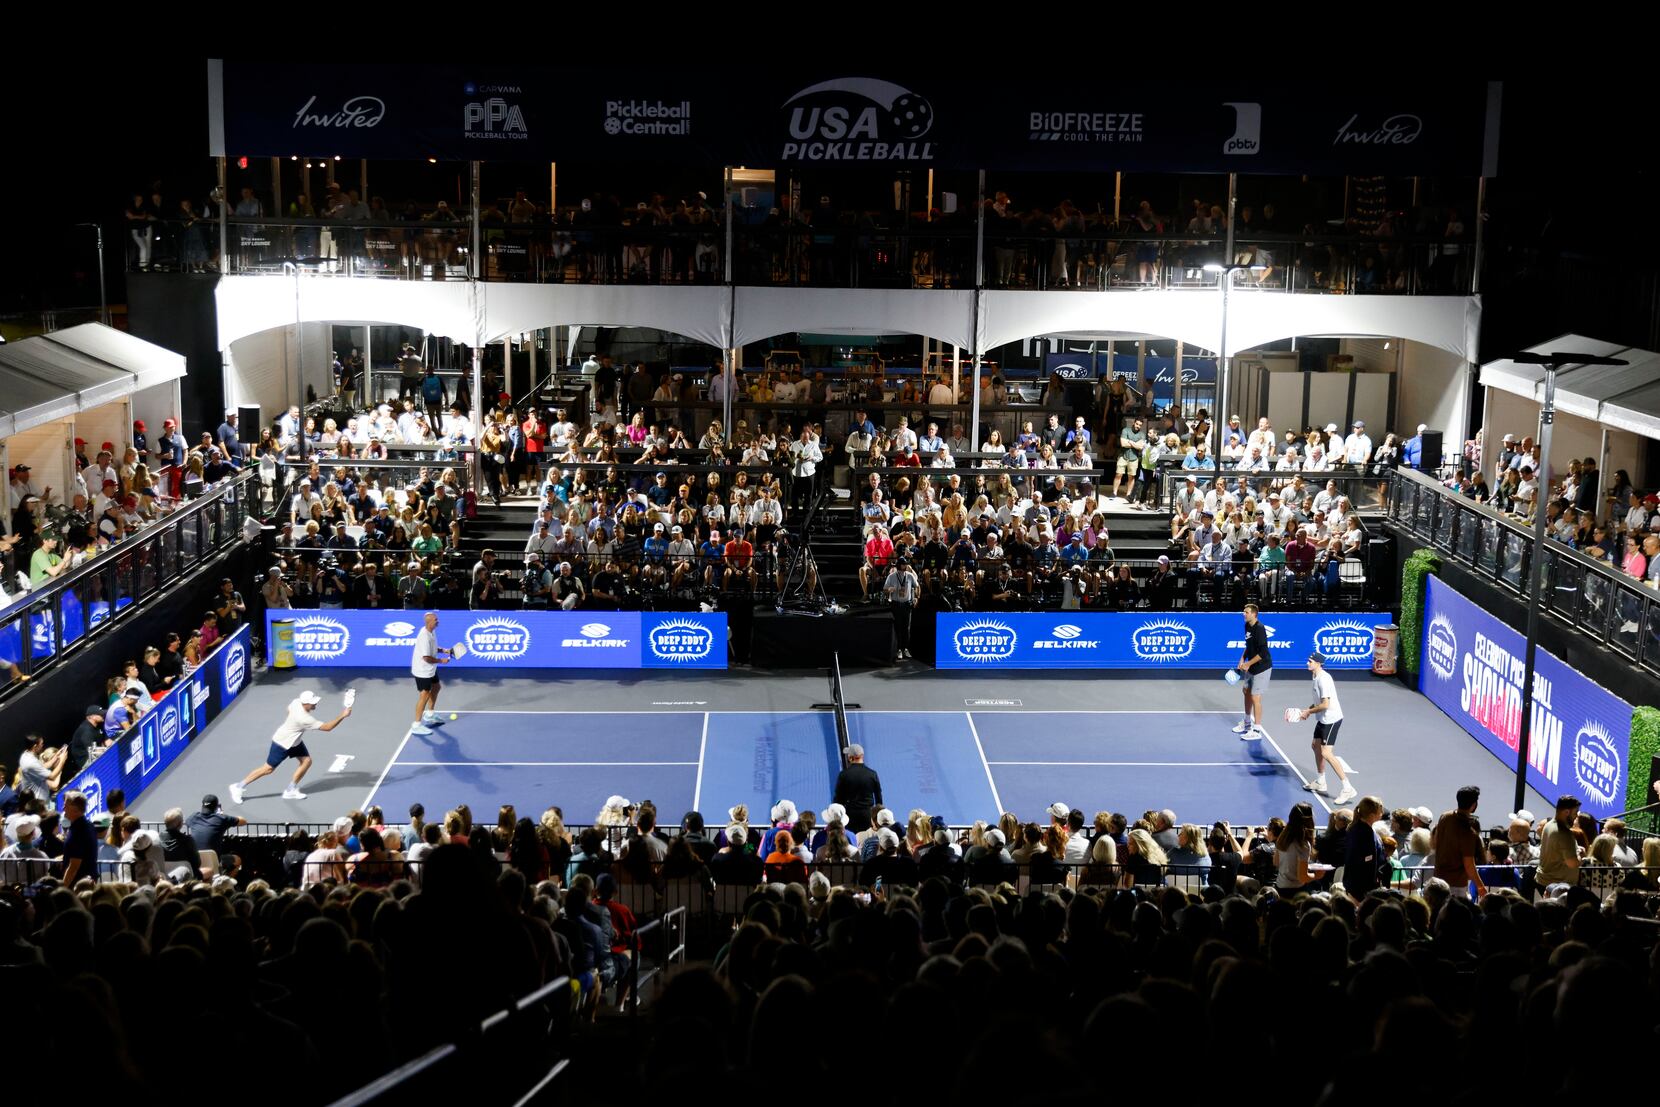 Tiebreaks push competition—not only in sports